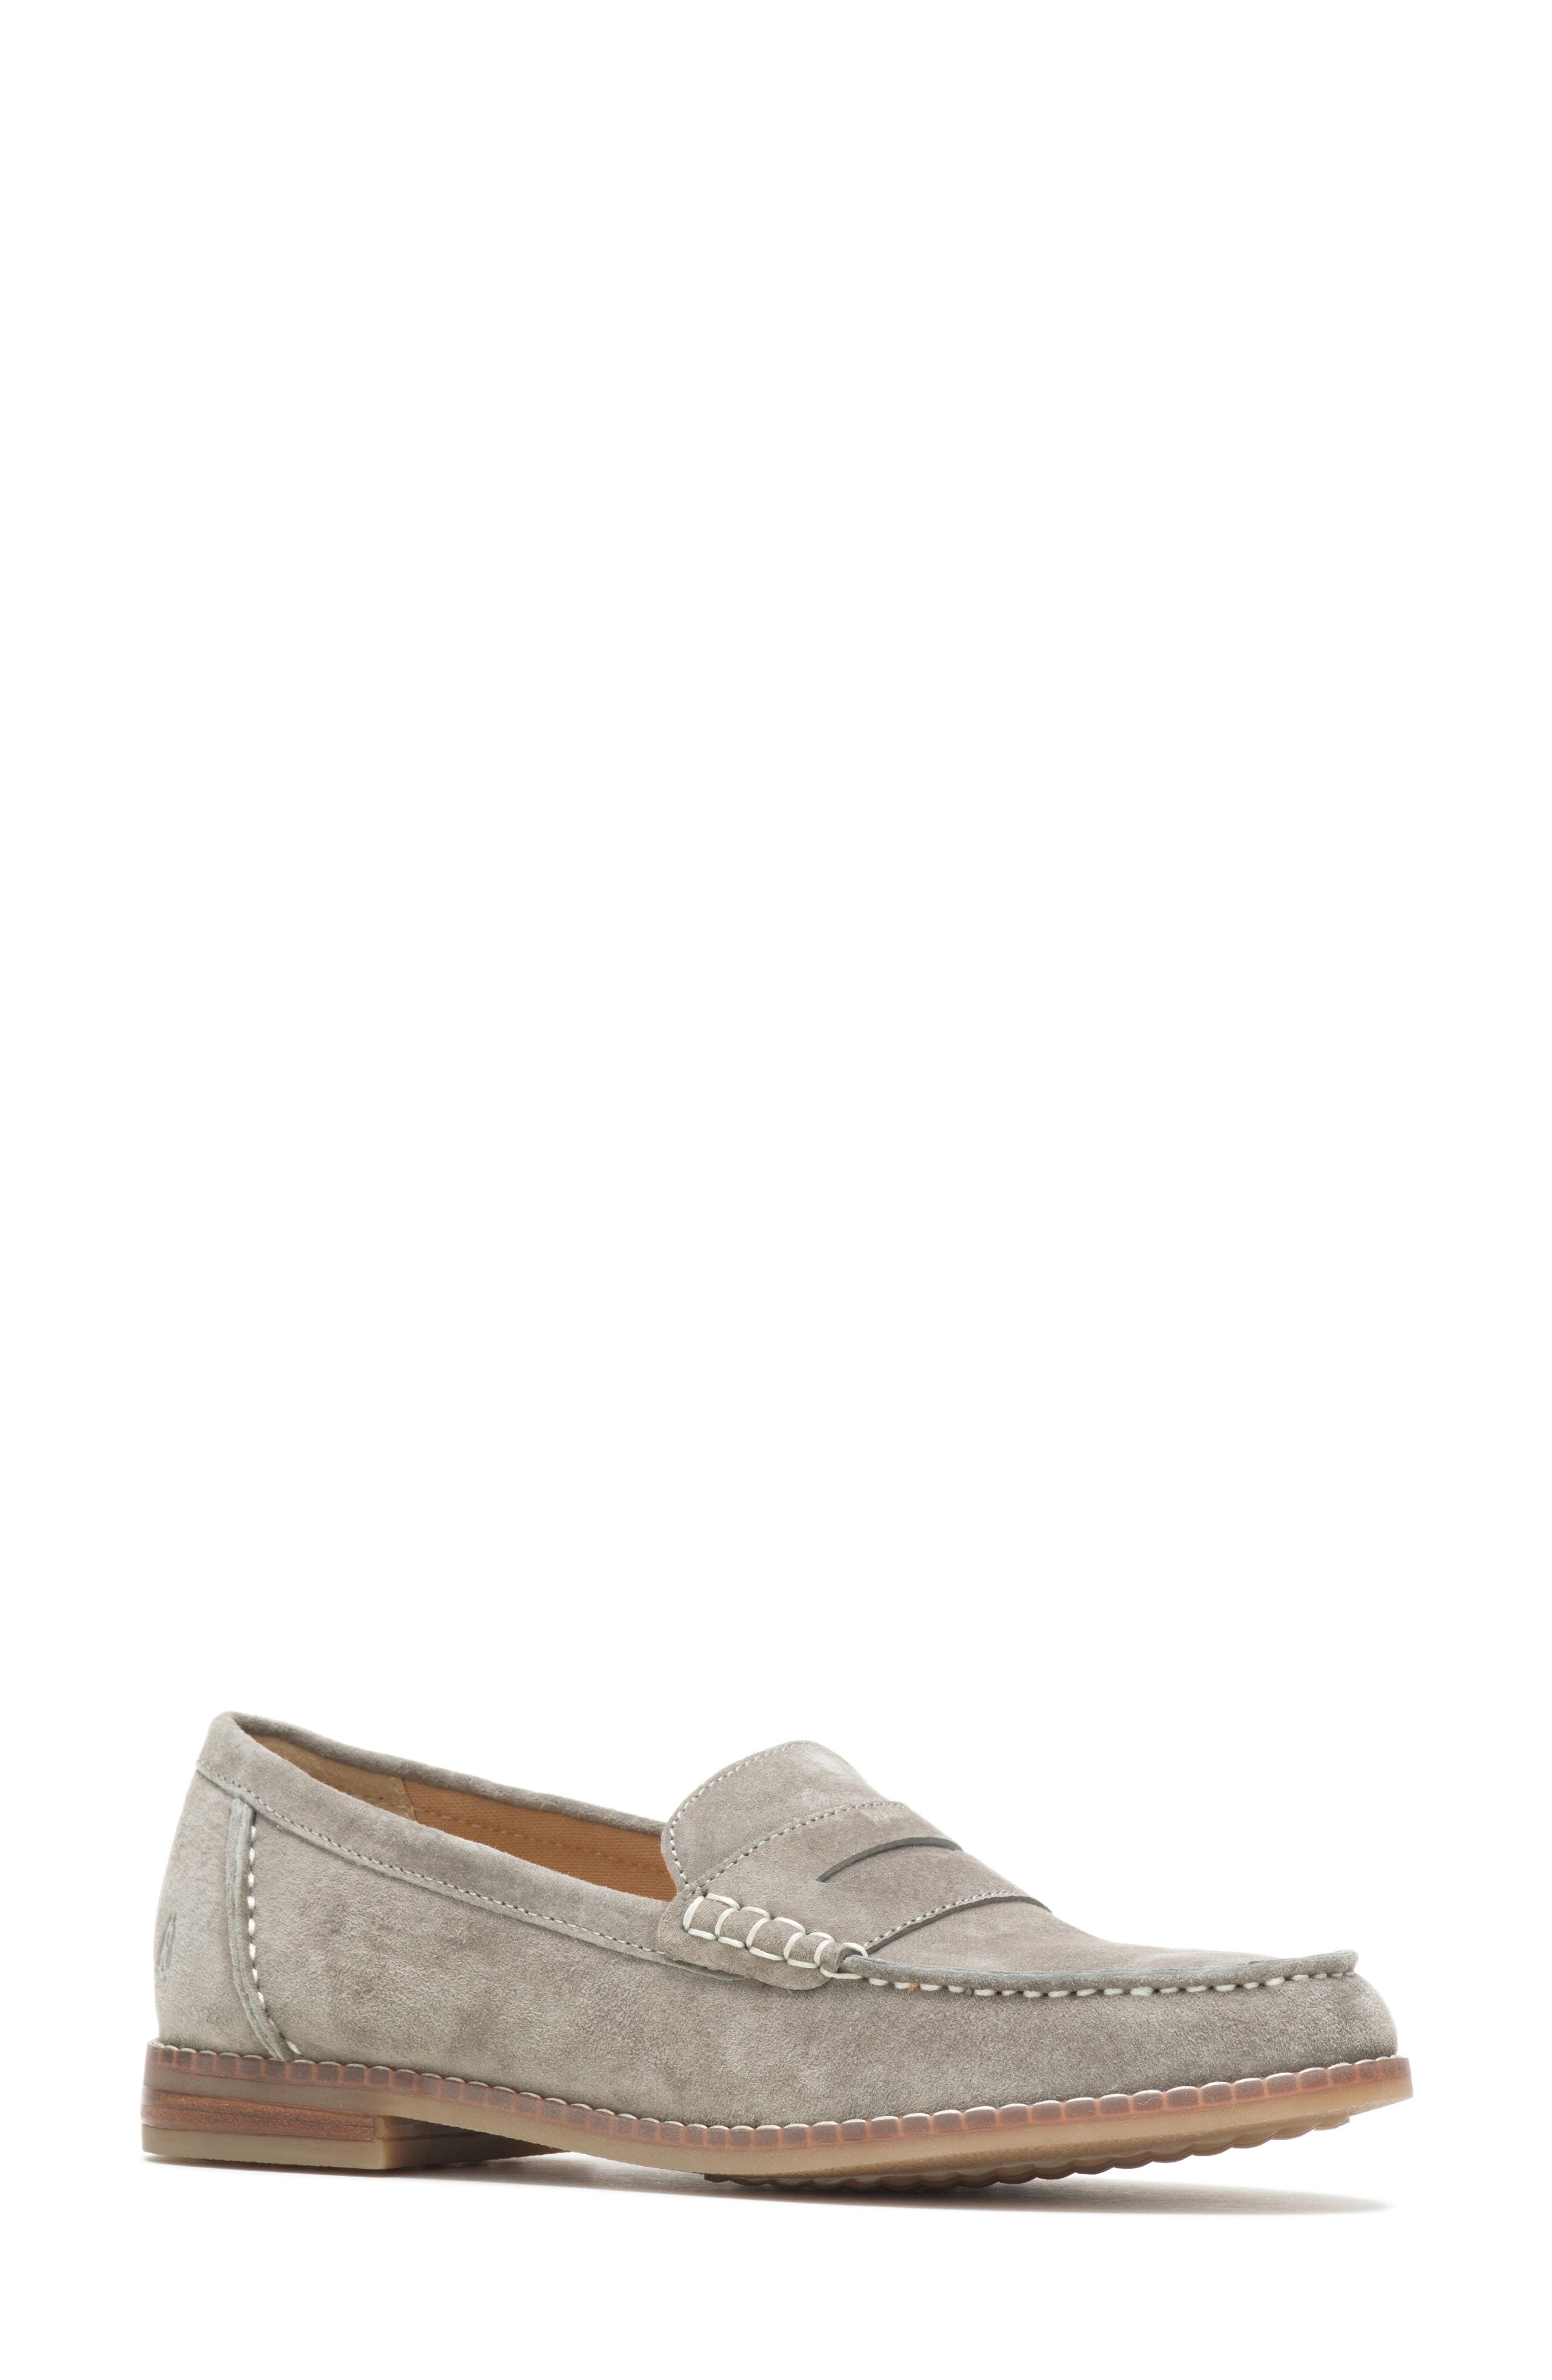 Women's Hush Puppies® Loafers \u0026 Oxfords 